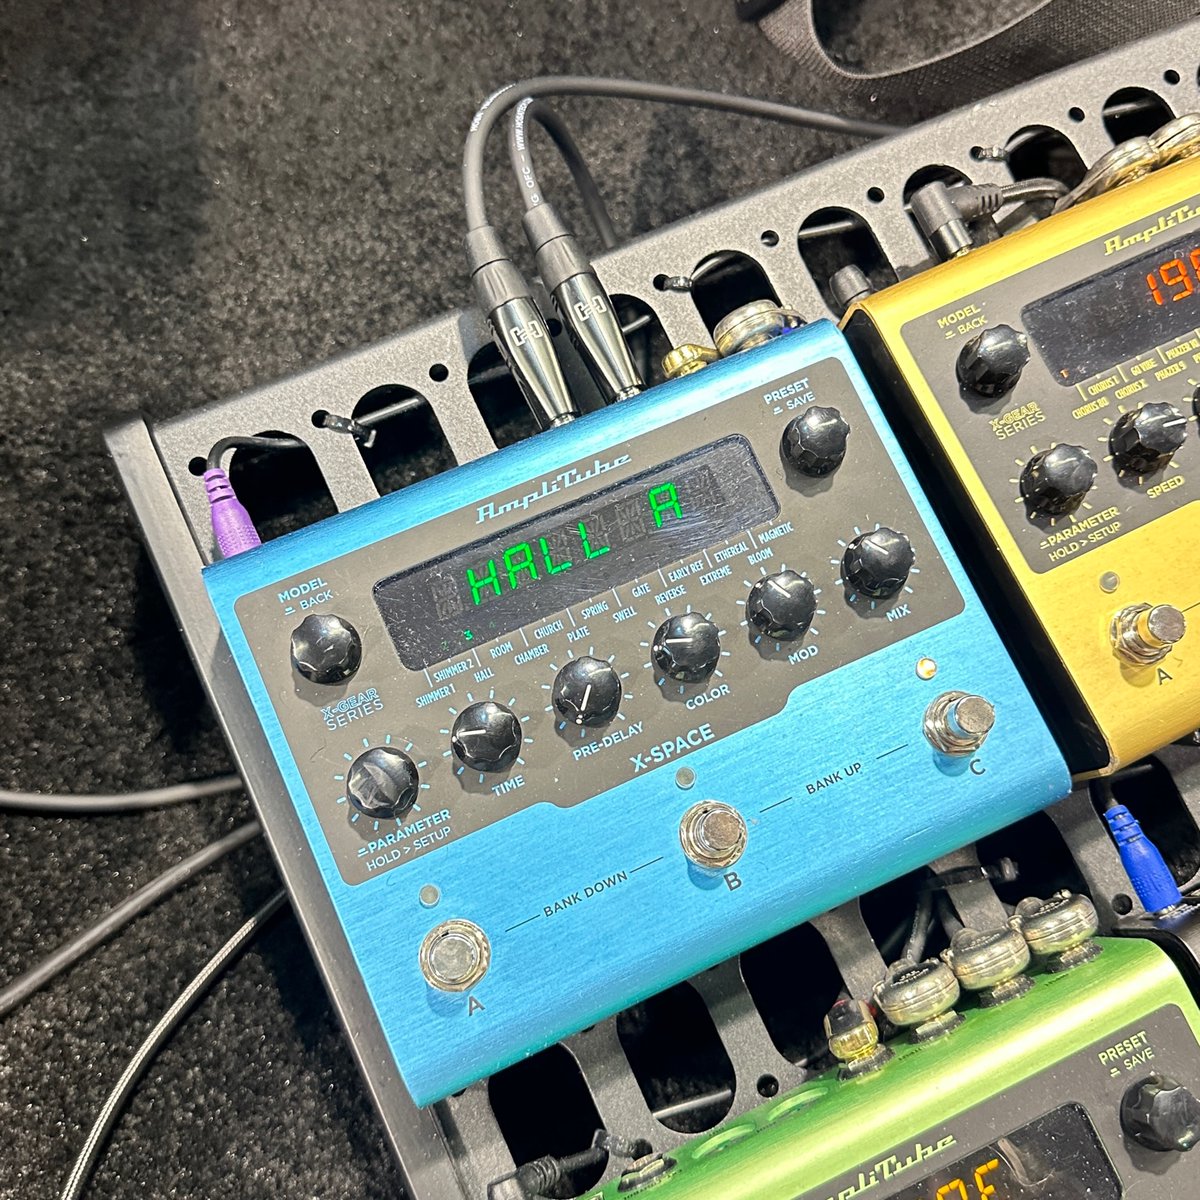 More Hosa in the wild at the @NAMMShow. @ikmultimedia is showing off their new TONEX Pedal in Hall D Booth 5115, and AXE I/O One Interface in ACC North Hall Booth 15302. #NAMMShow